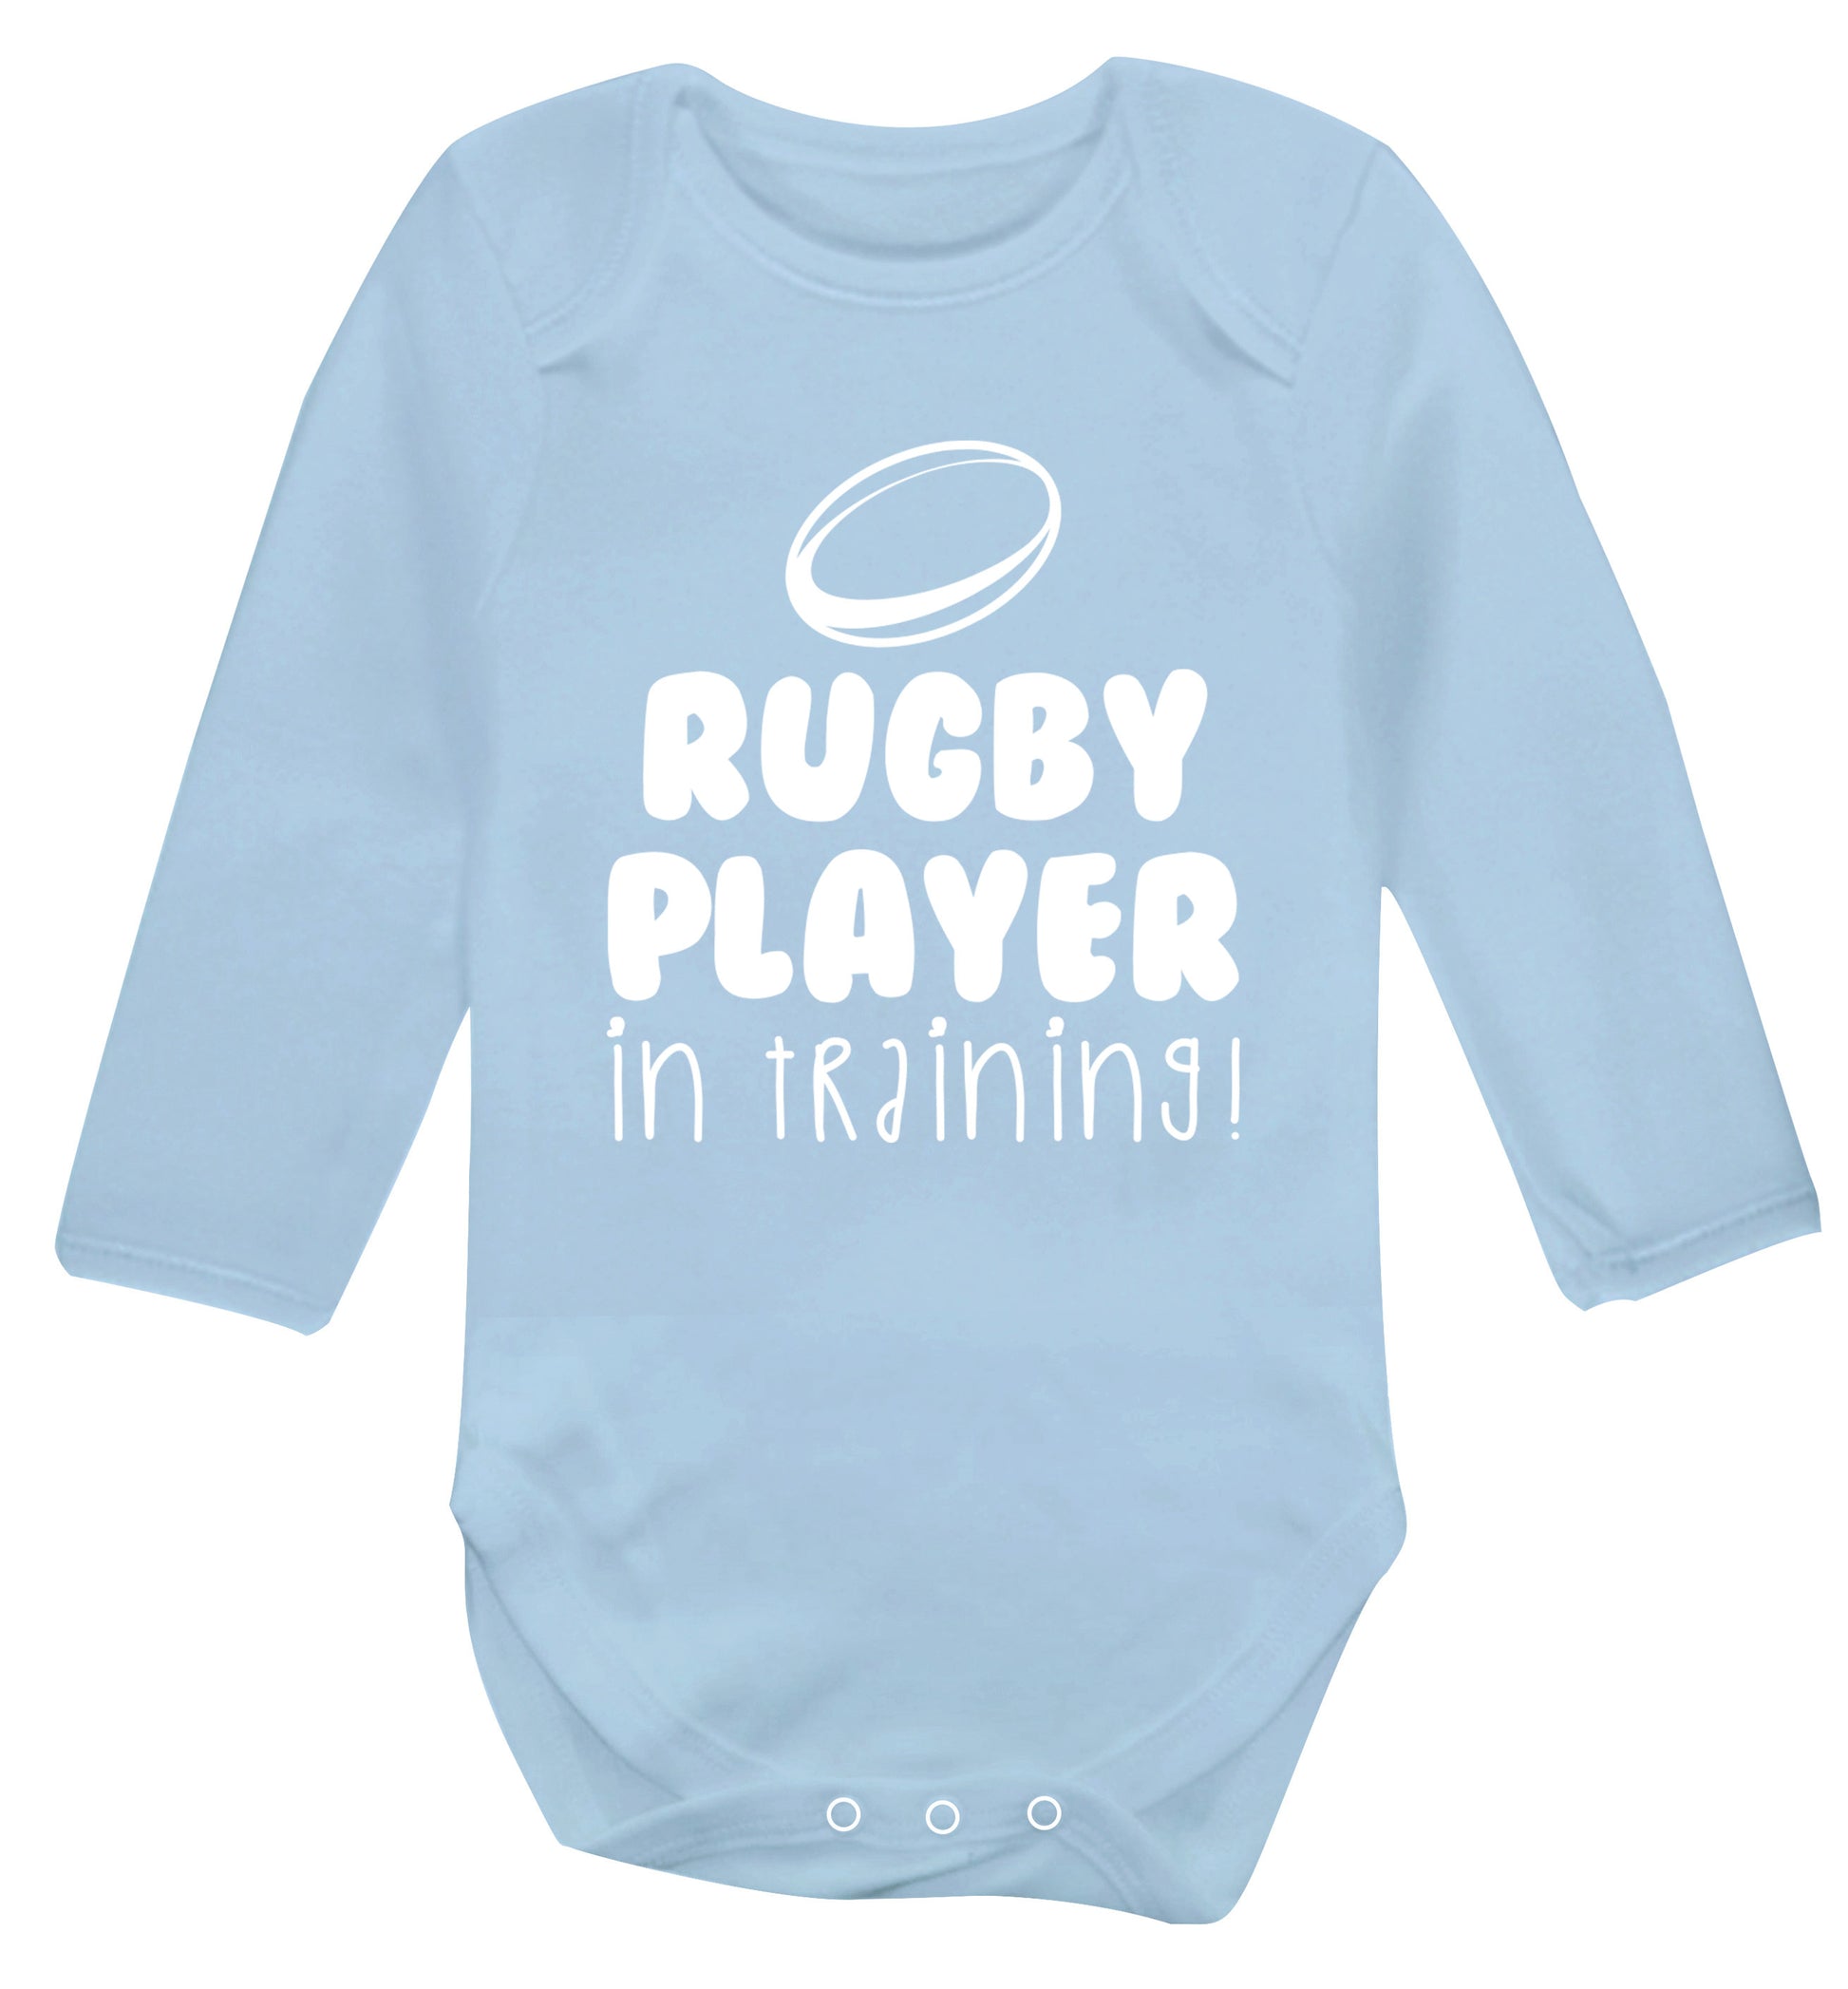 Rugby player in training Baby Vest long sleeved pale blue 6-12 months